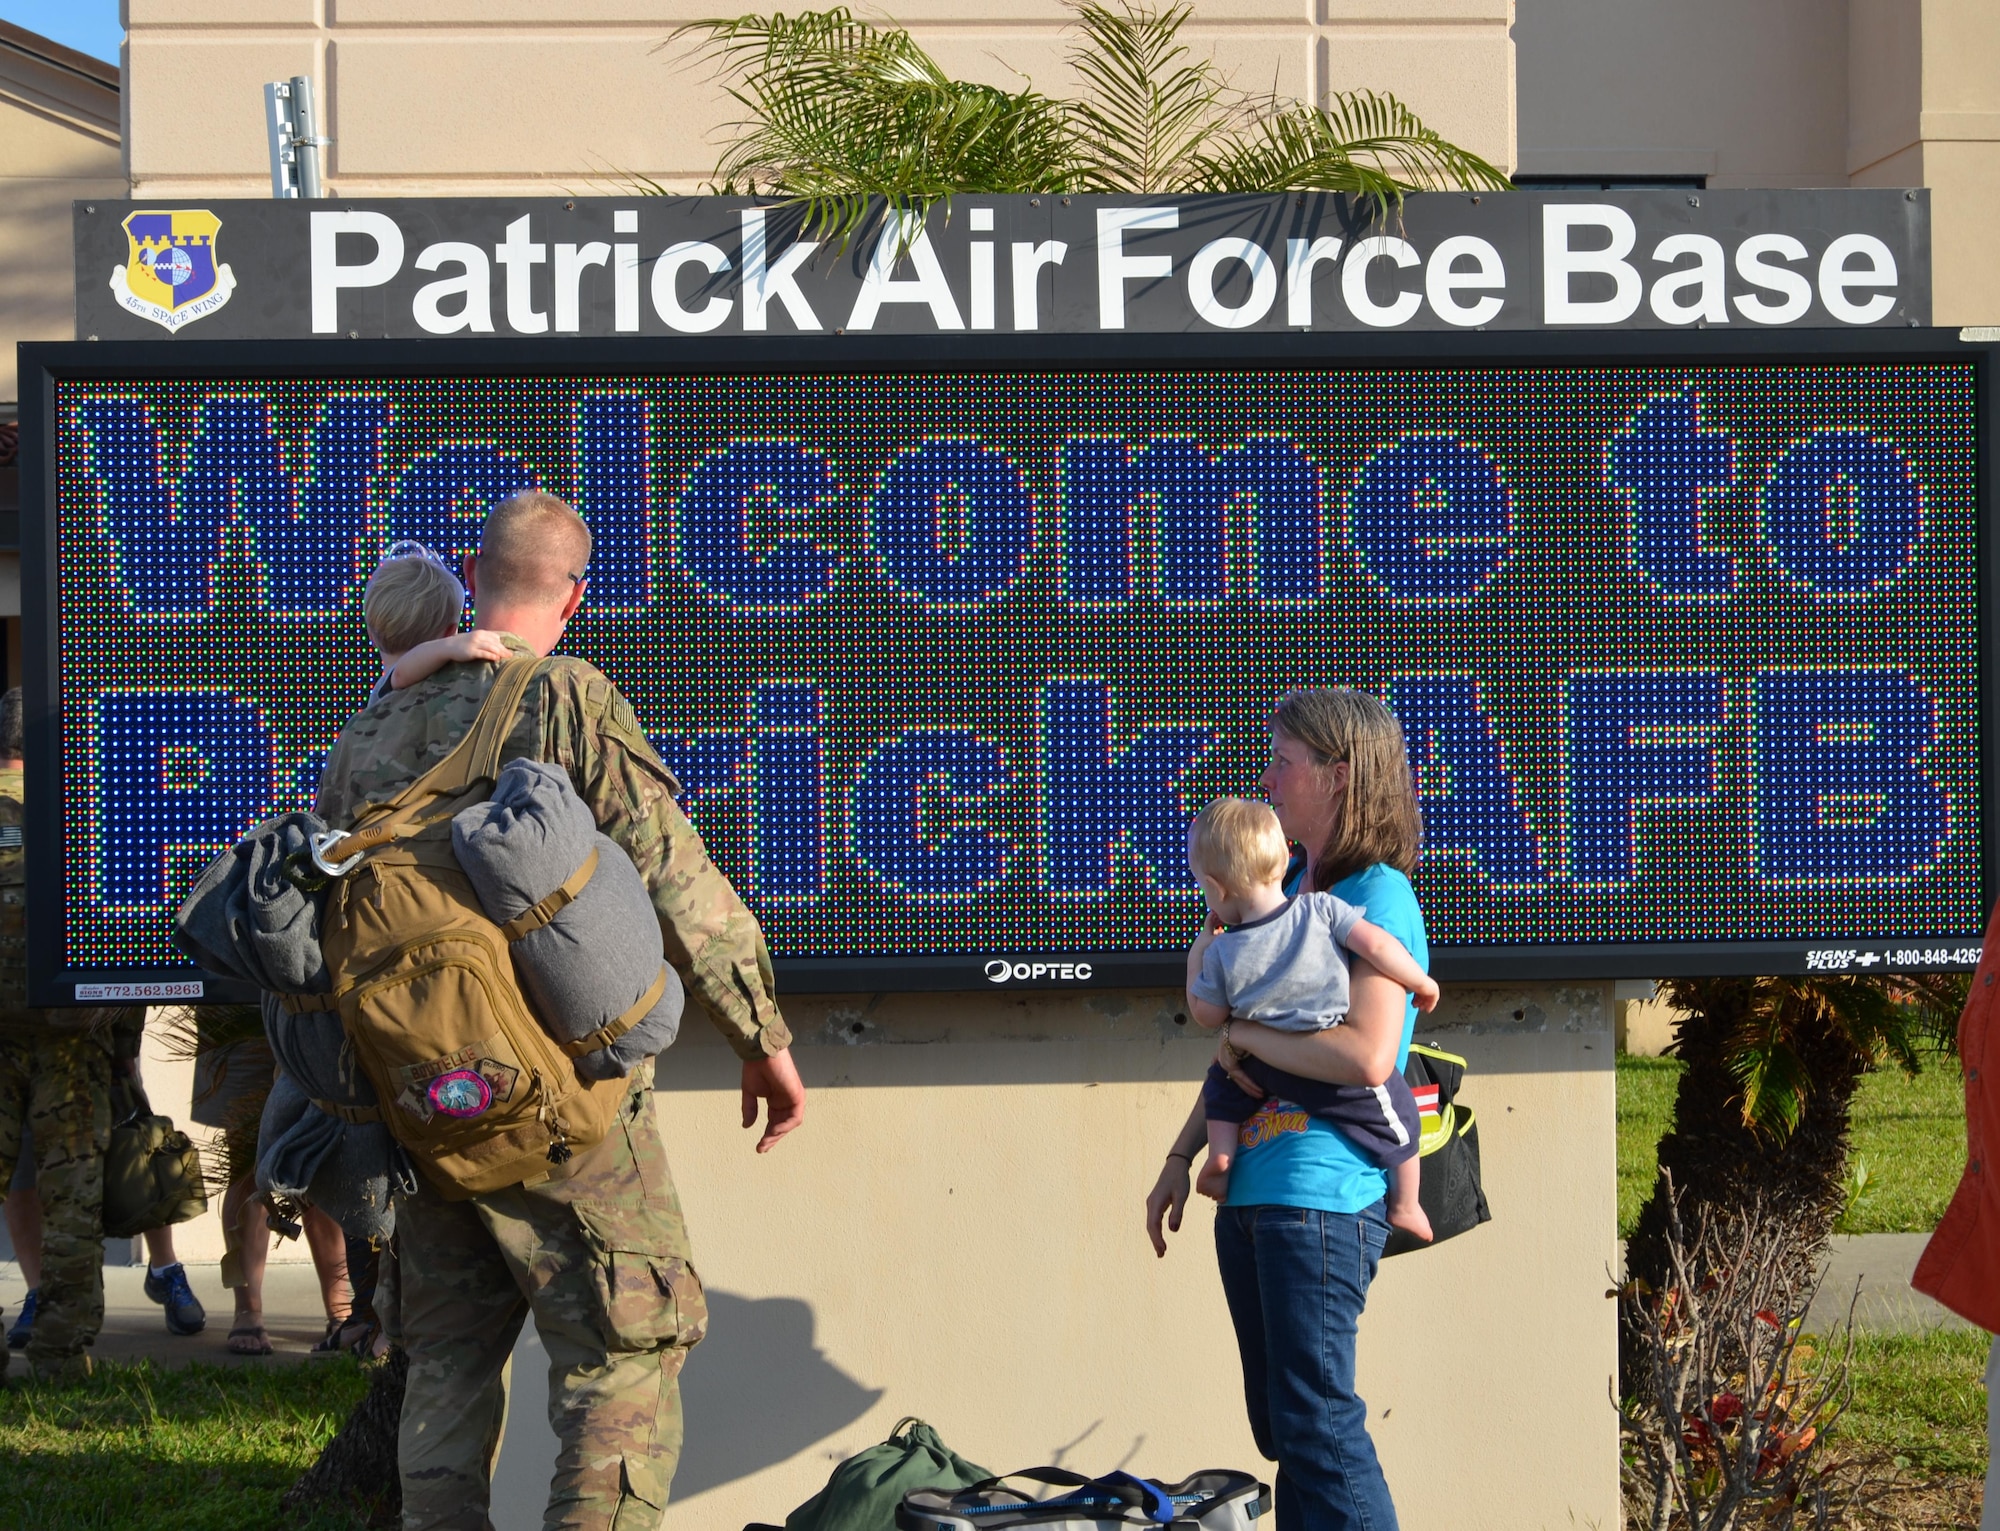 Air Force reservists greet their friends and family on the flight line at Patrick Air Force Base, Fla., upon return from a four-month deployment Feb. 8, 2017. Approximately 50 wing reservists returned from Afghanistan and were transported to Patrick by an Air Force C-17 Globemaster aircraft. (U.S. Air Force photo by 1st Lt. Anna-Marie Wyant)